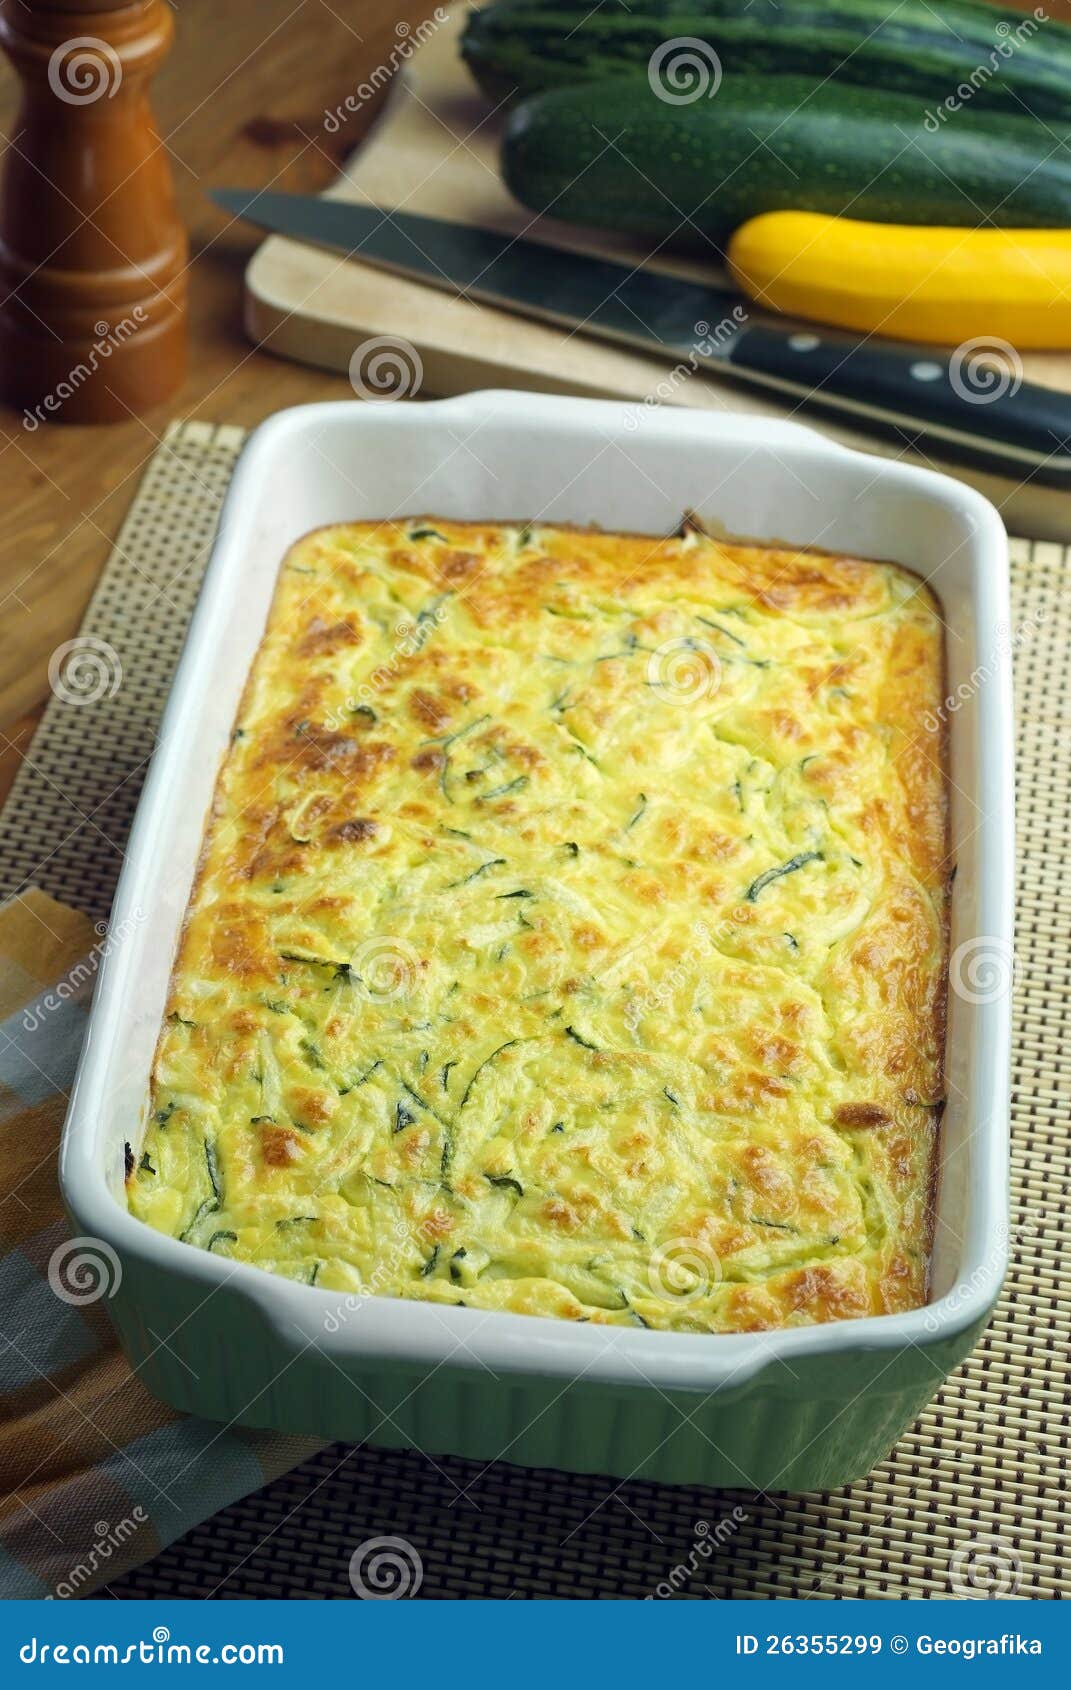 courgette and feta souffle